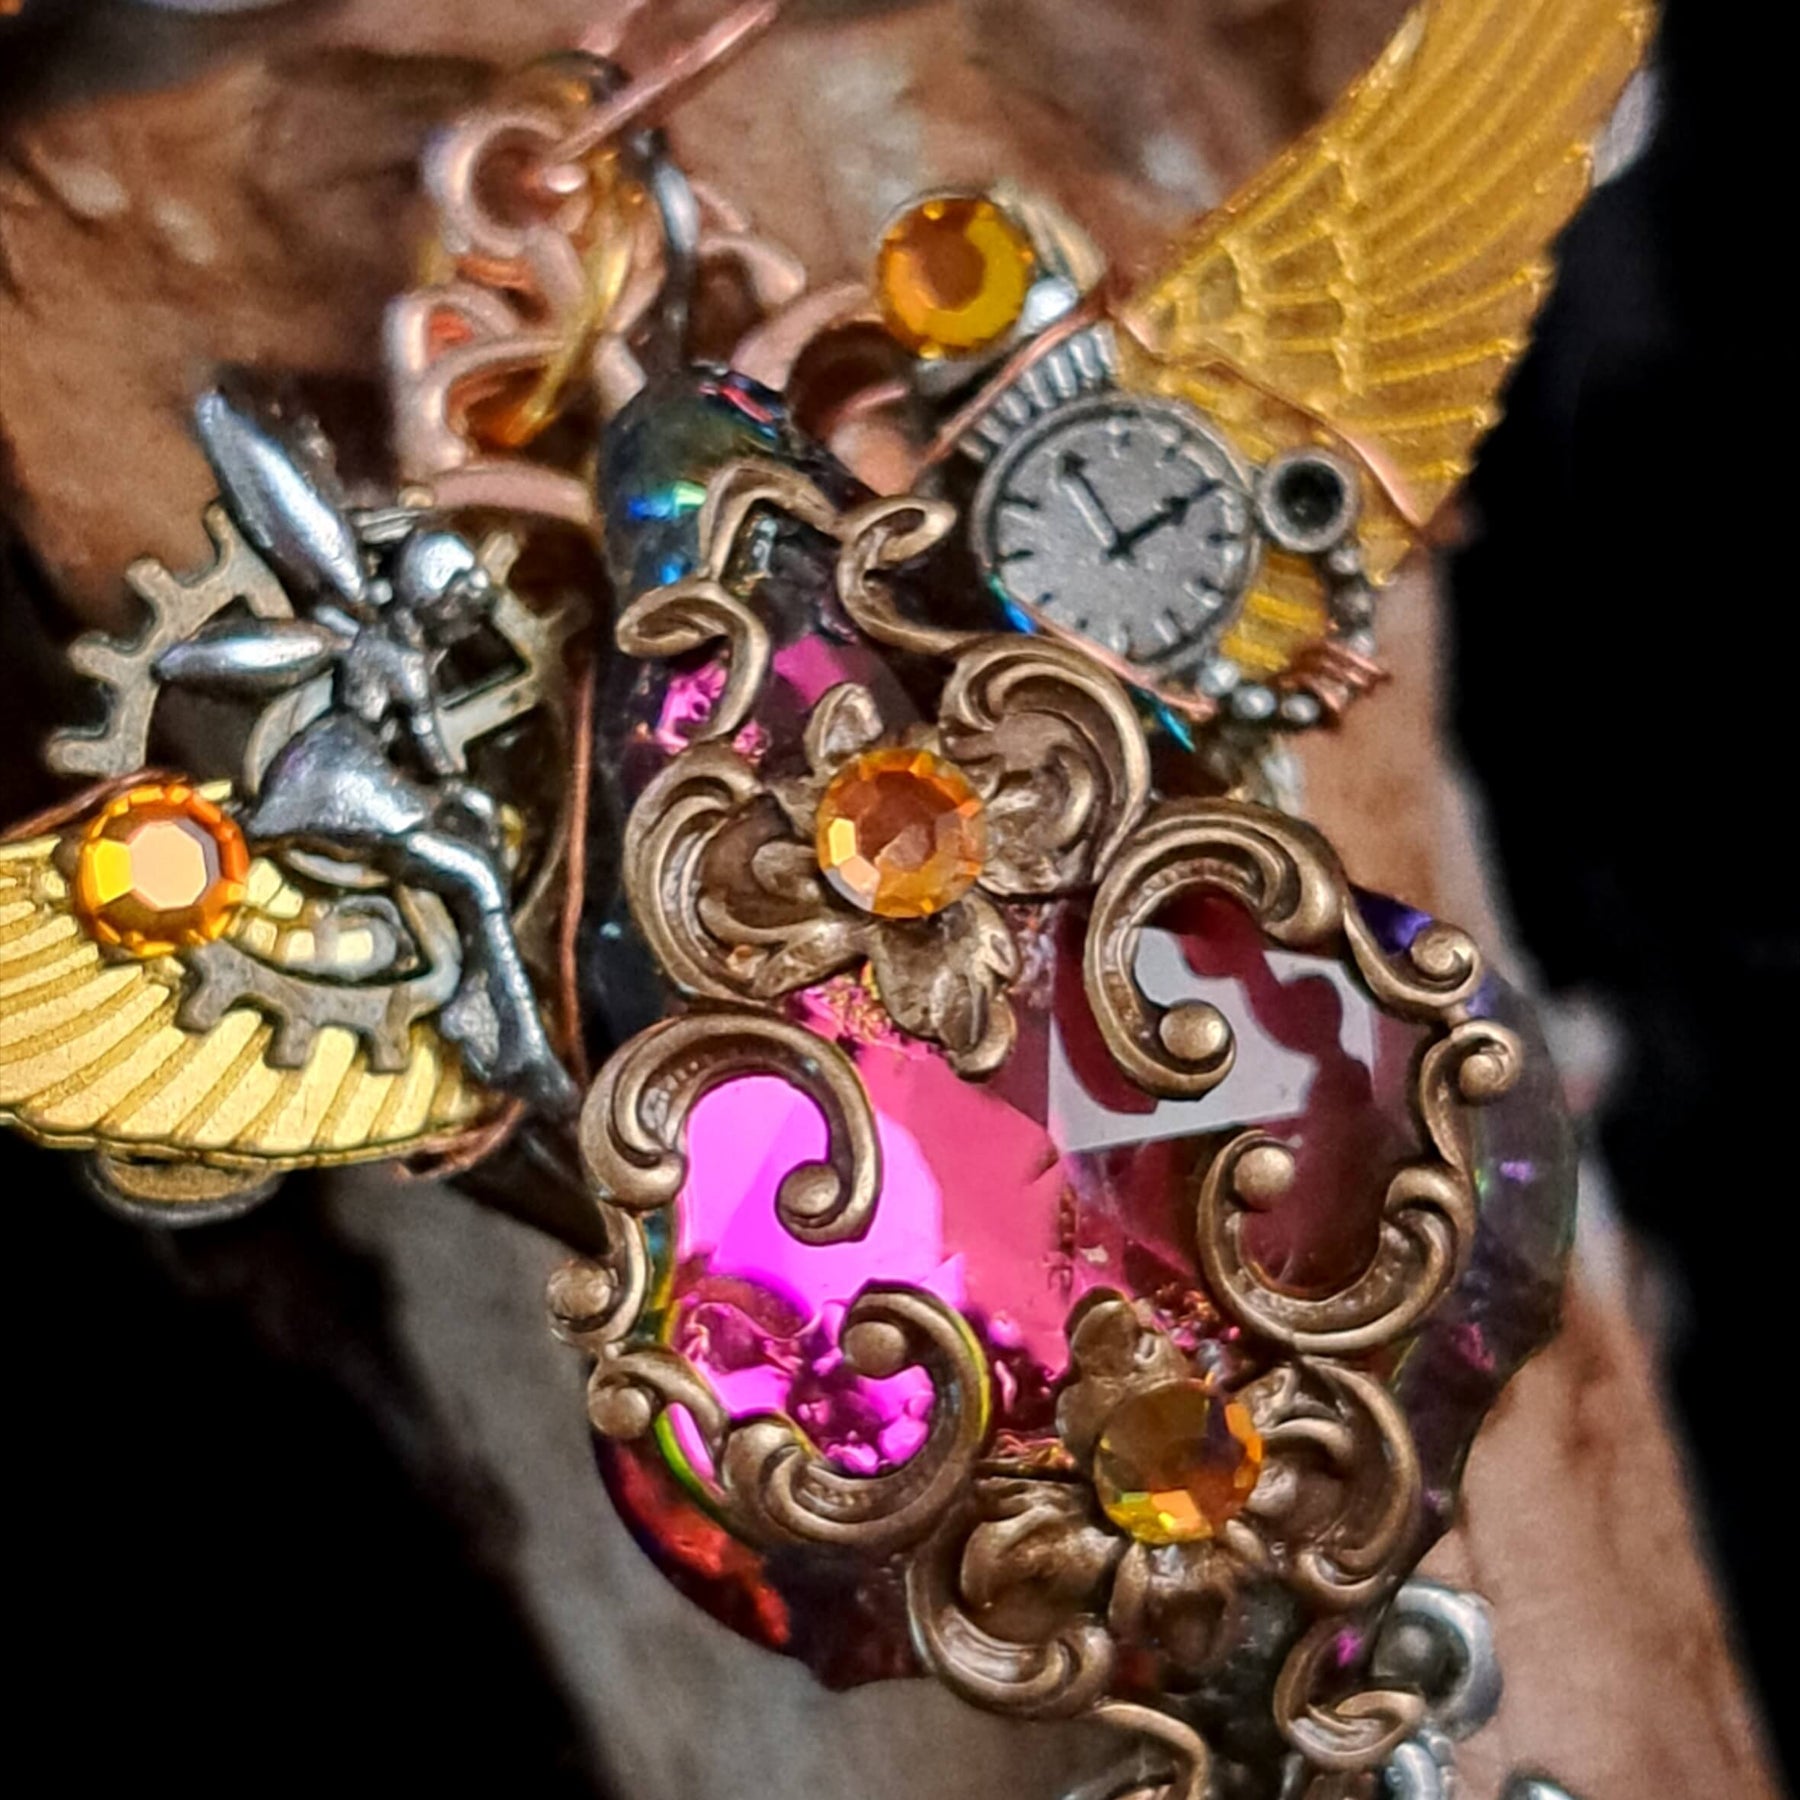 Winged Fantasy Fairy Necklace